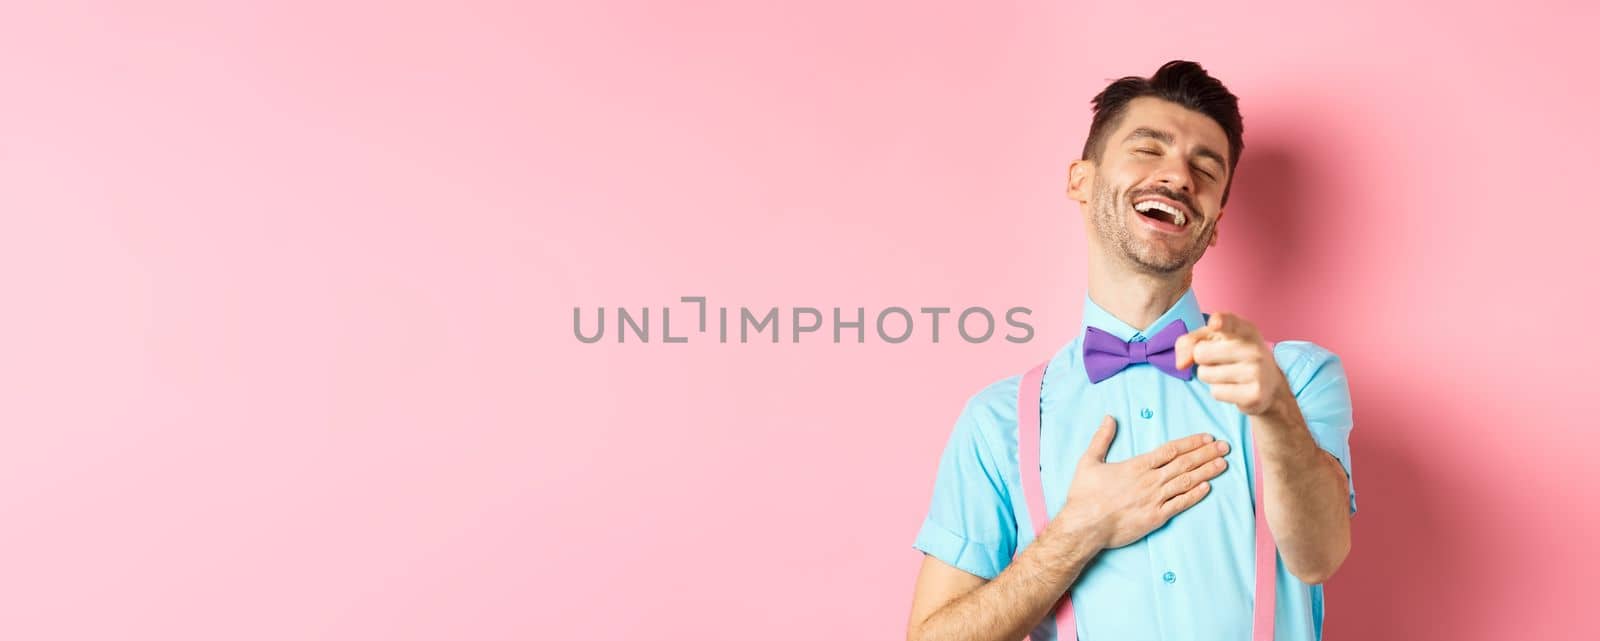 Handsome guy in bow-tie pointing finger at camera and laughing on something funny, checking out hilarious promo, standing on pink background.